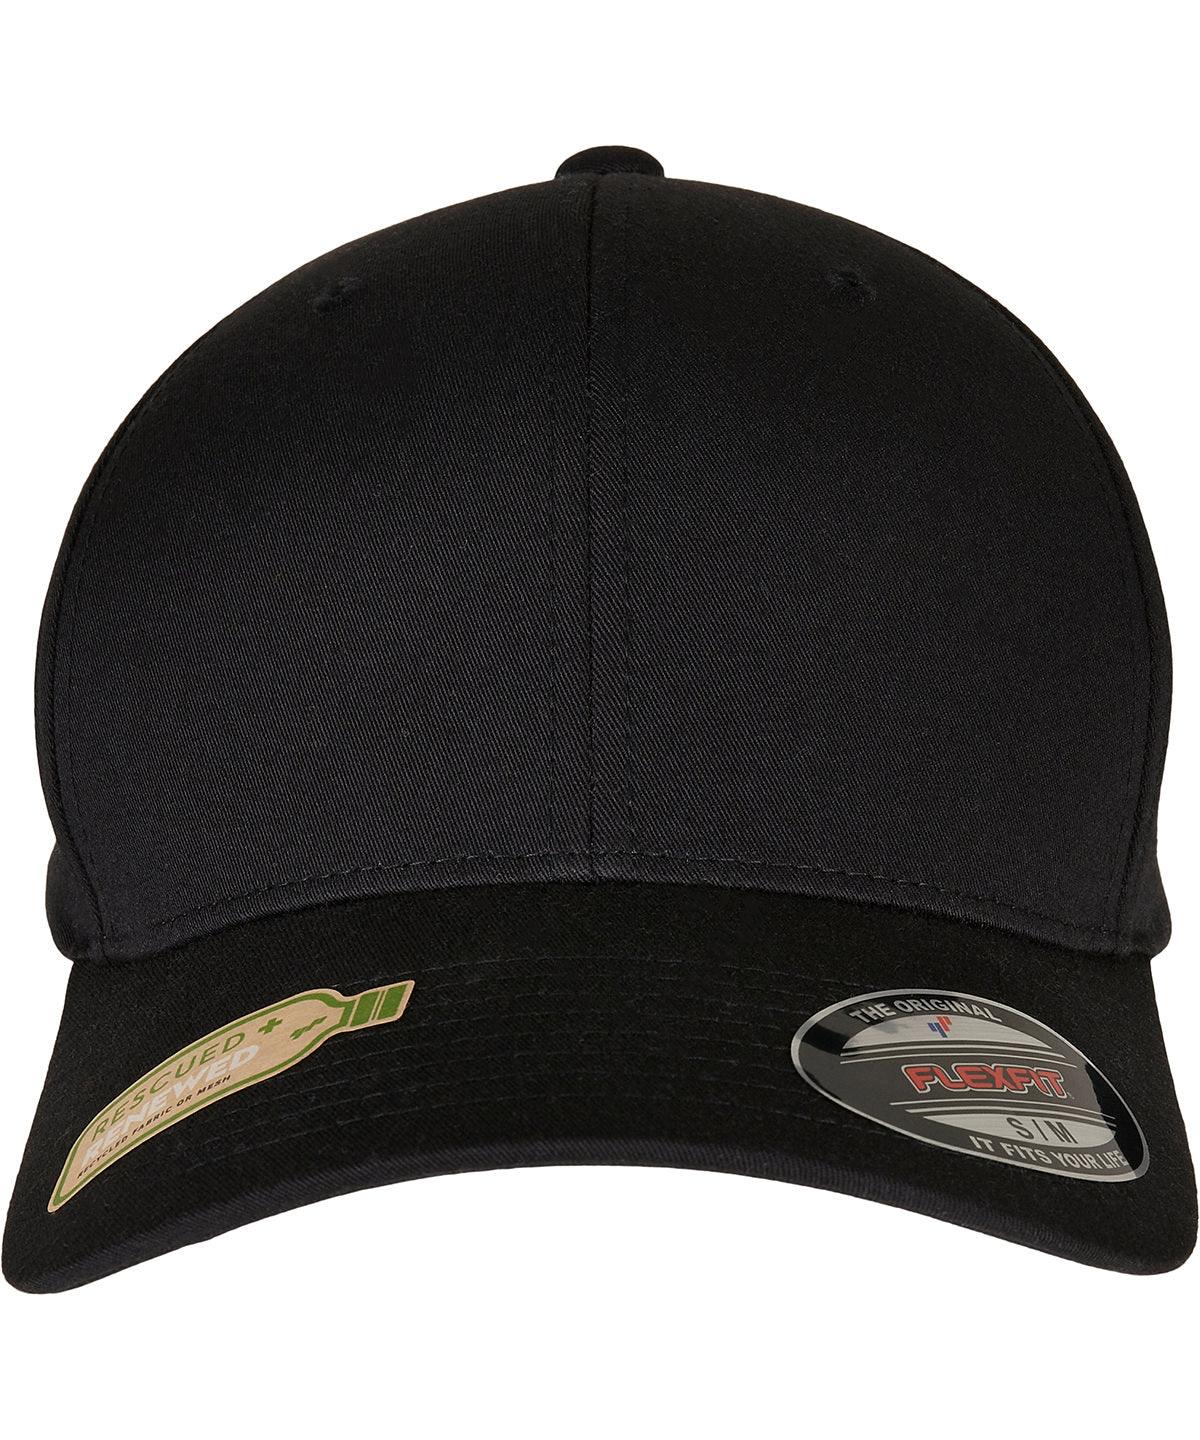 Beliebte Nr. 1 Silver - Flexfit recycled 2022Next cap For Flexfit Styles by & HeadwearNew Conscious GenOrganic Yupoong polyester